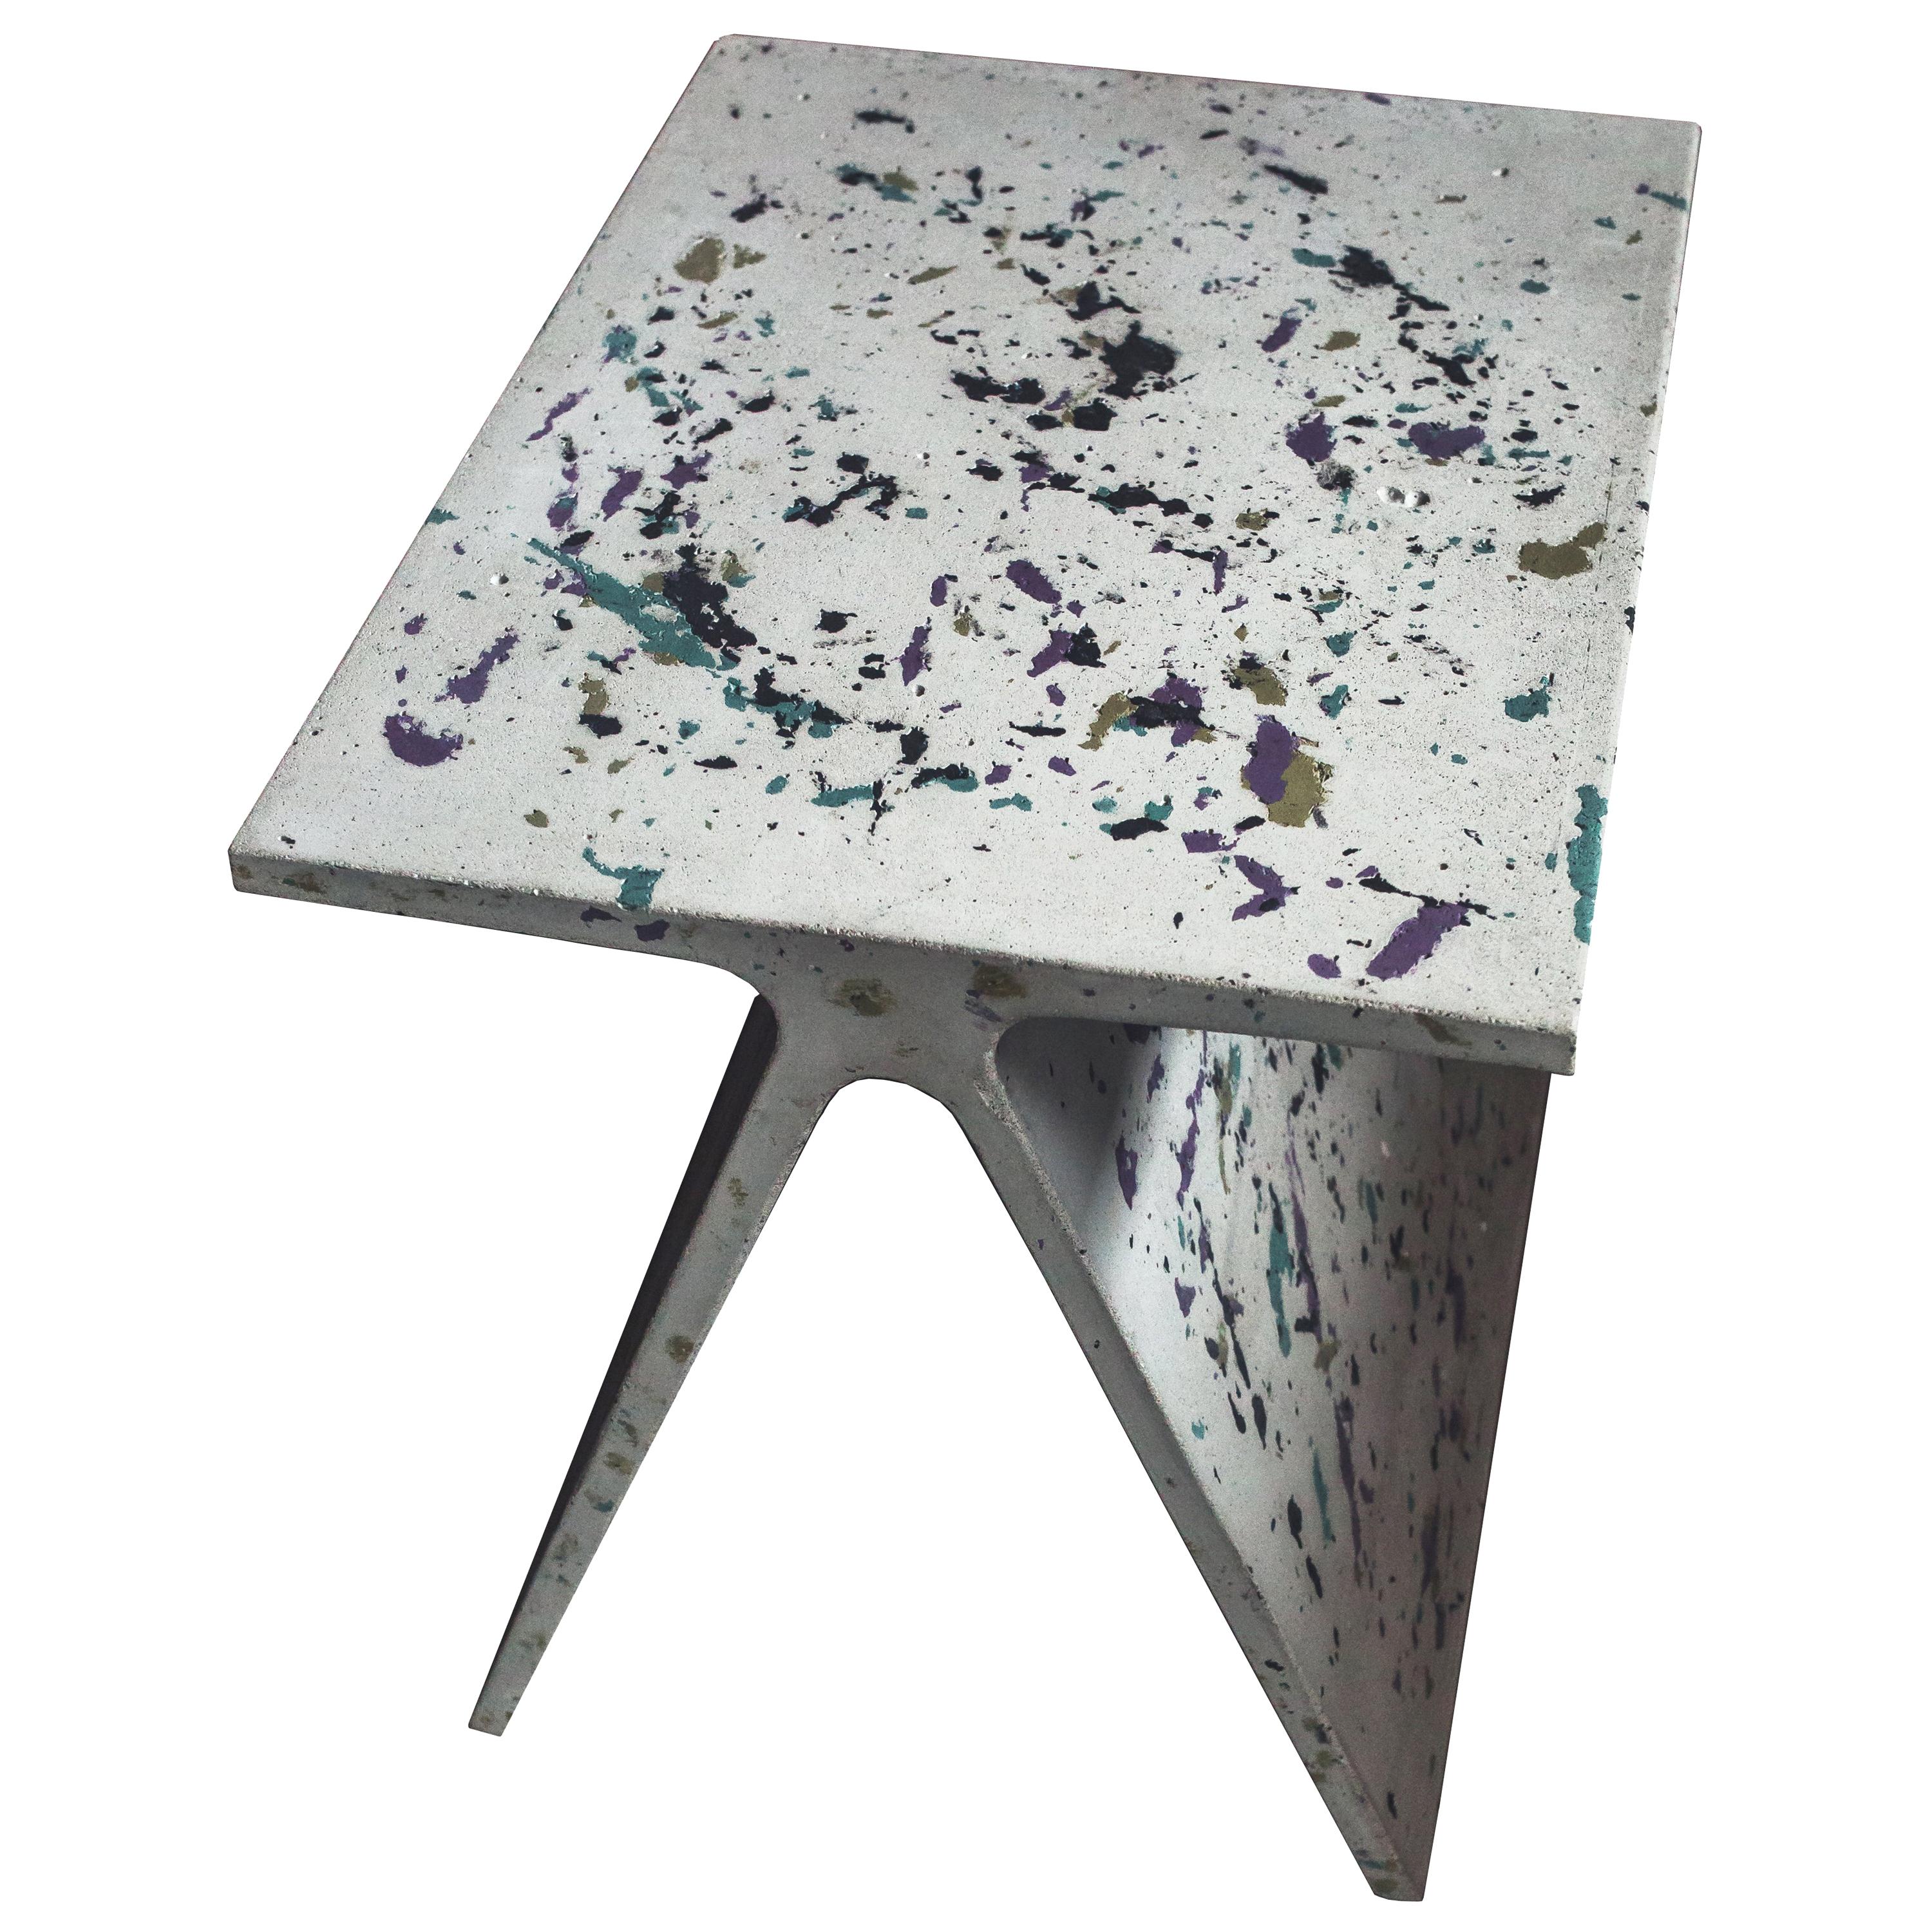 Alpha Q End Table or Stool, Concrete Chapa Ed. for Indoor or Outdoor by Mtharu For Sale